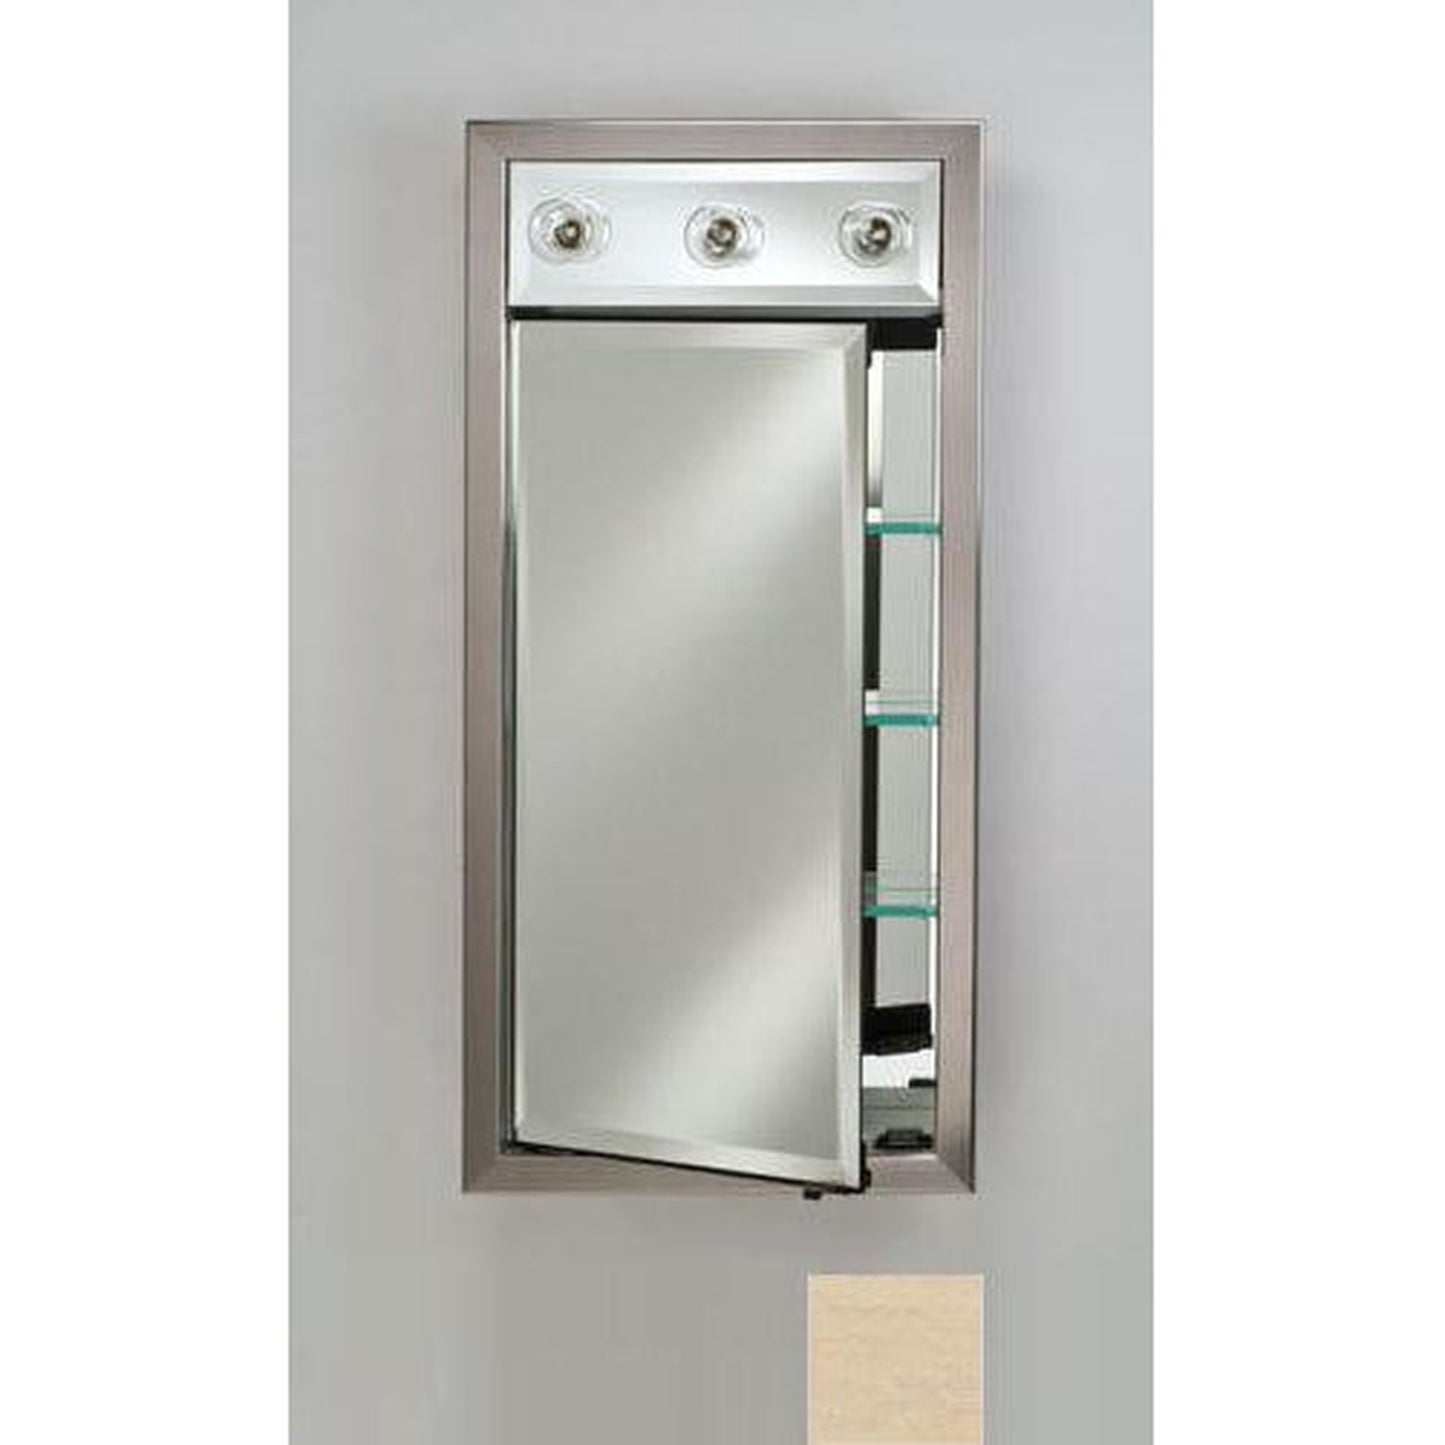 Afina Signature 17" x 30" Arlington Pickled Recessed Left Hinged Single Door Medicine Cabinet With Contemporary Lights